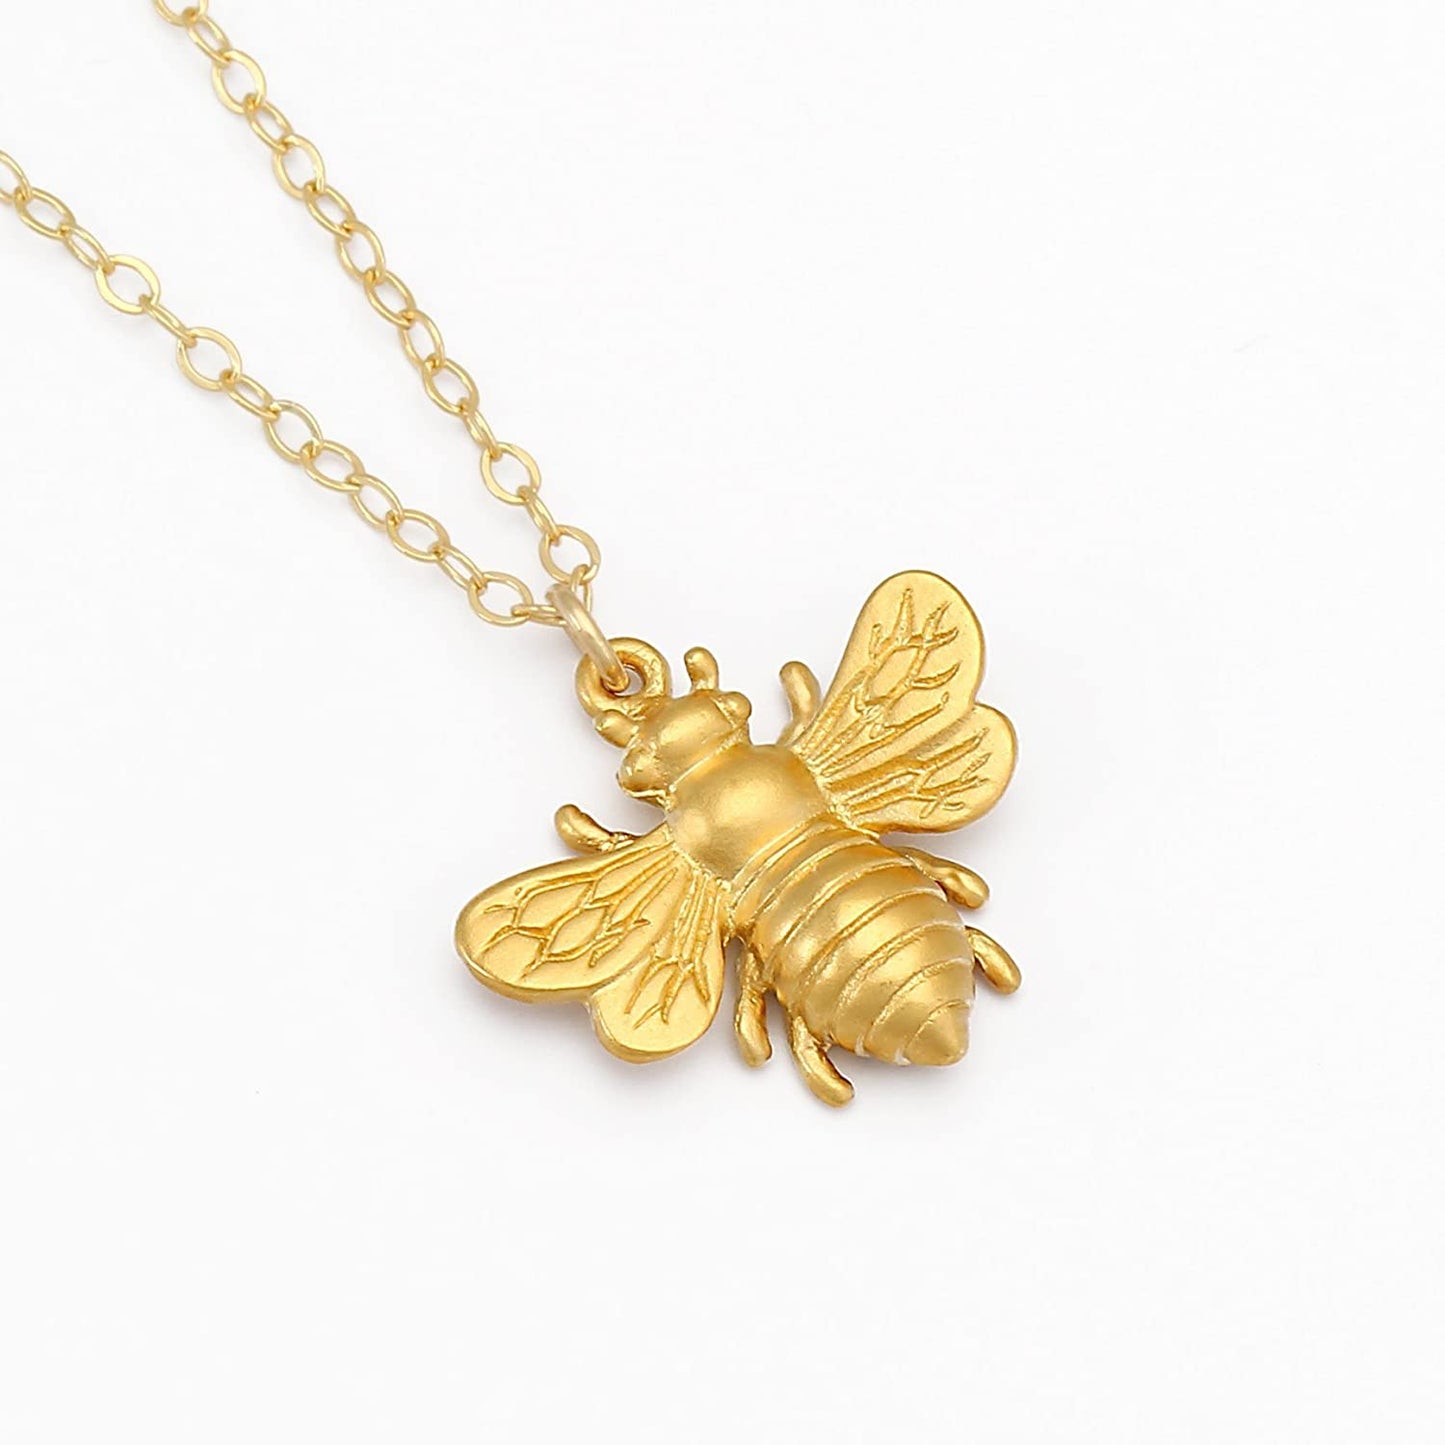 Large Gold Bee Necklace • Gold Honeybee/Bumblebee Charm • Simple Everyday Jewelry • Bridesmaid Gift • Garden Themed Wedding • Save the Bees …